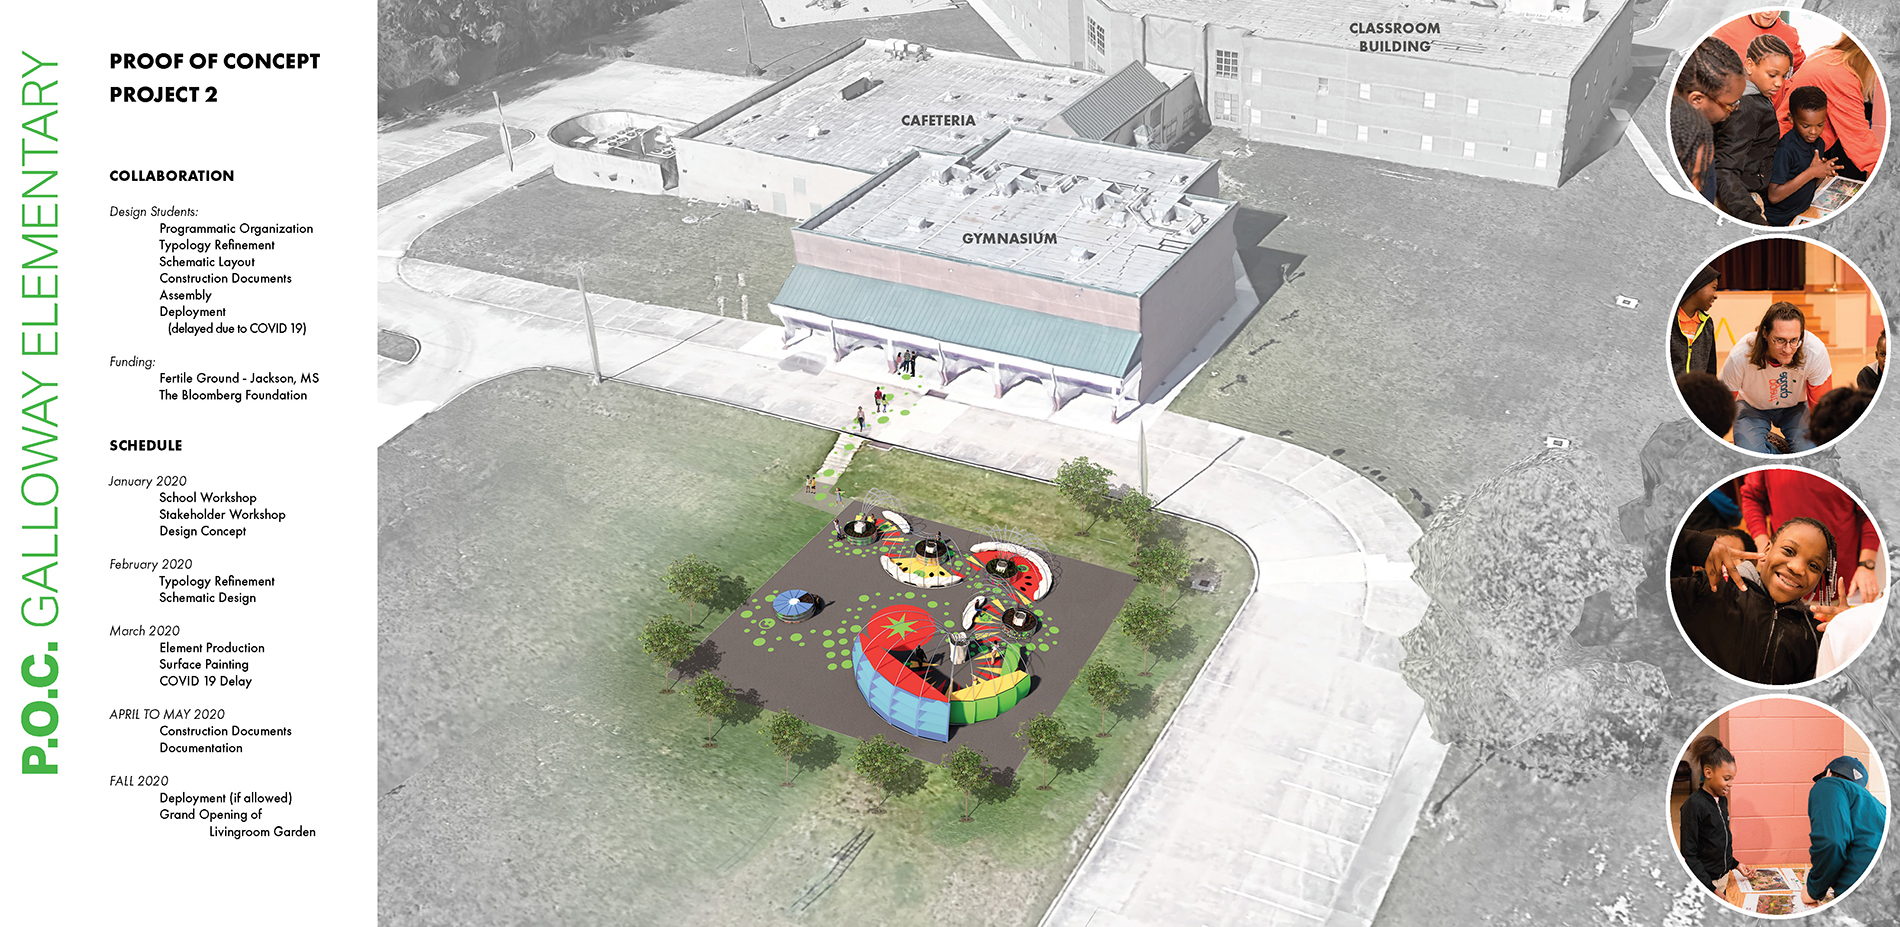 Galloway Elementary Overview